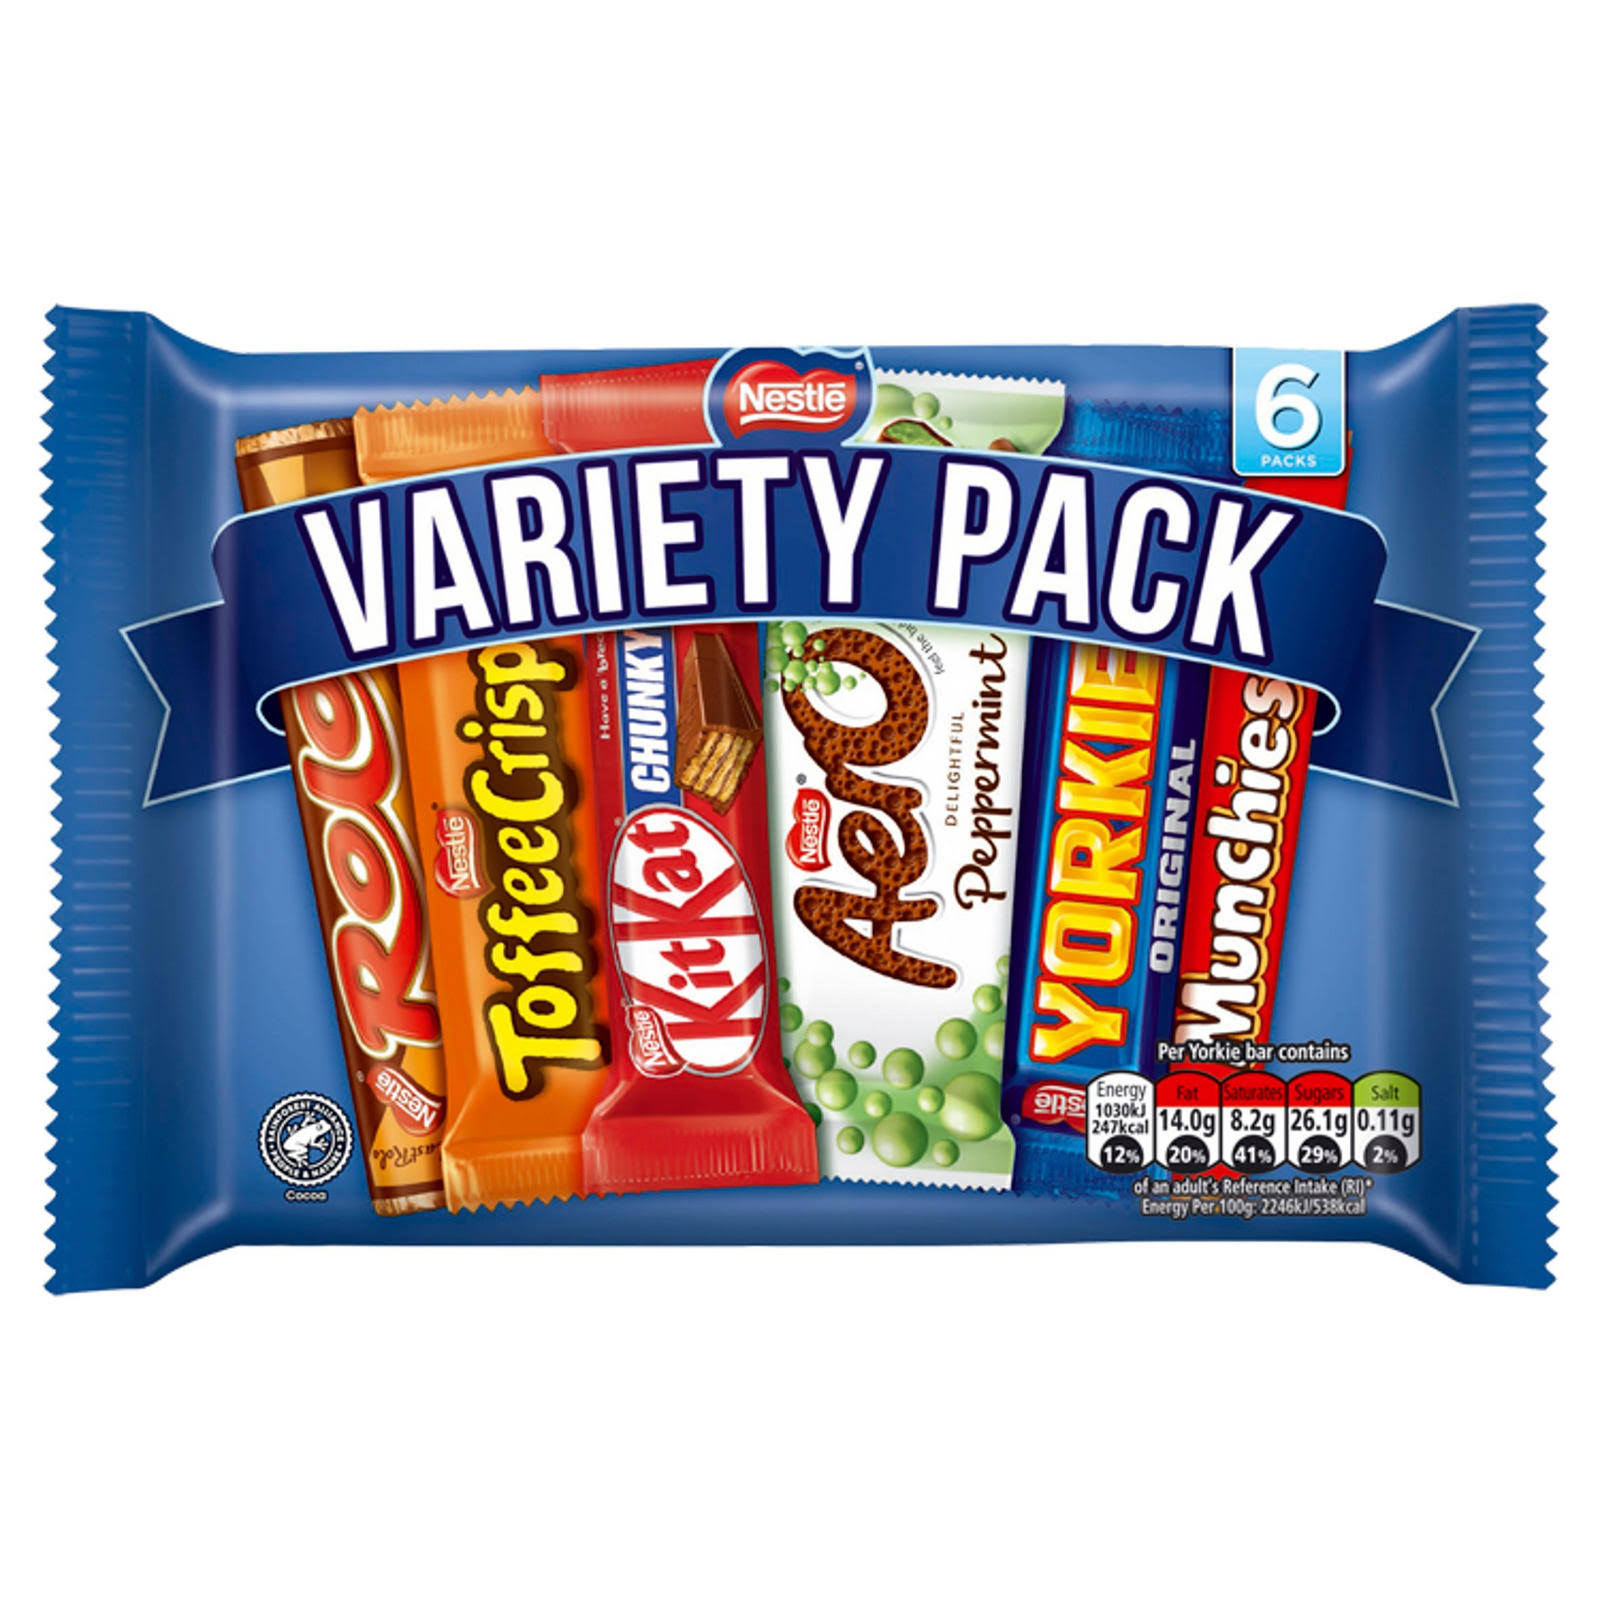 Nestle Big Variety Pack Delivered to USA